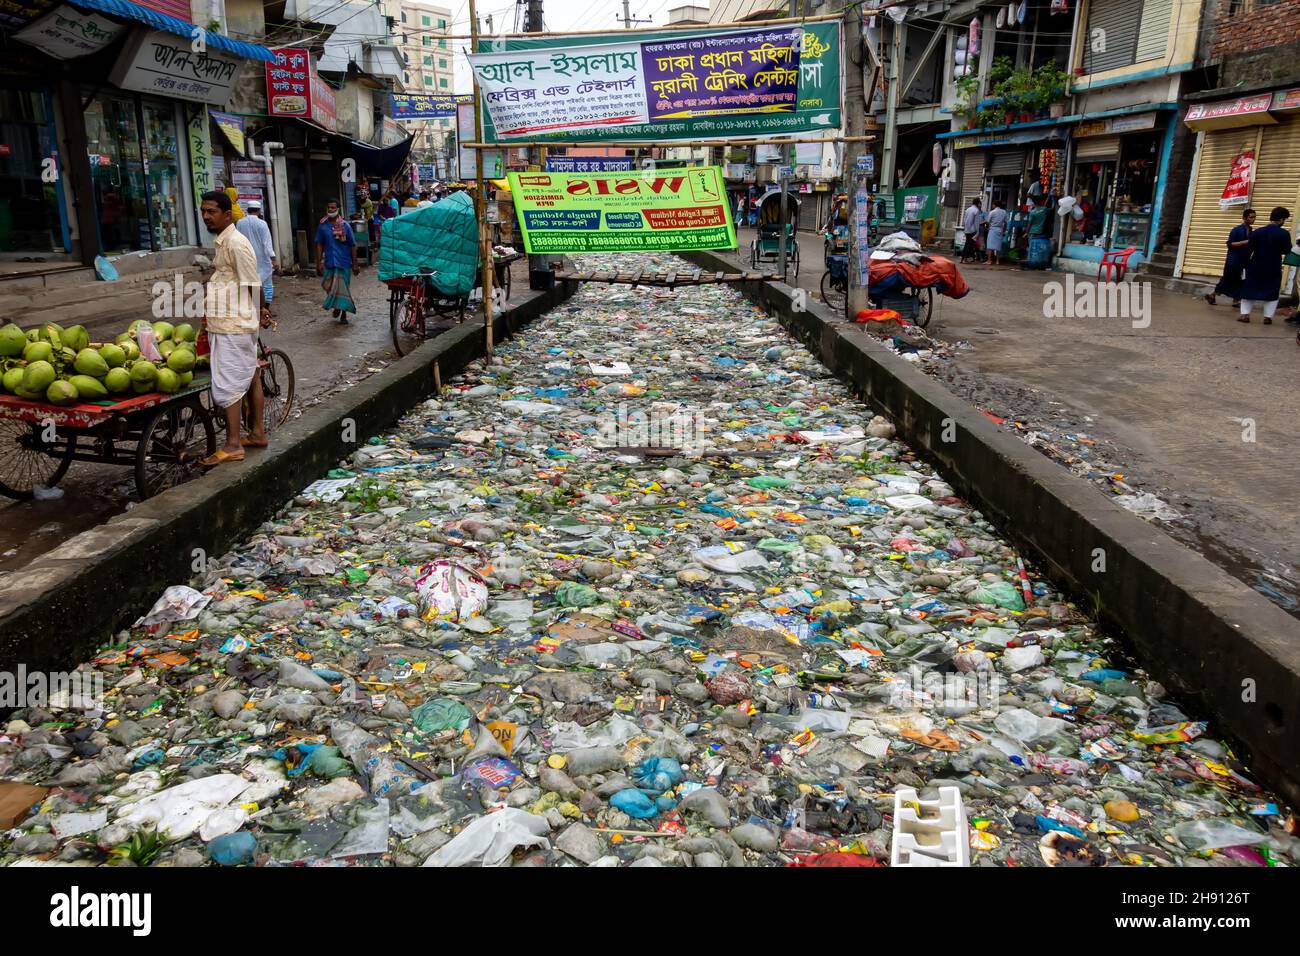 Bangladesh â. “ October 19, 2021: The mouth of the canal is blocked by piles of plastic waste and food waste dumped in the city of Jatrabari, Dhaka. Stock Photo